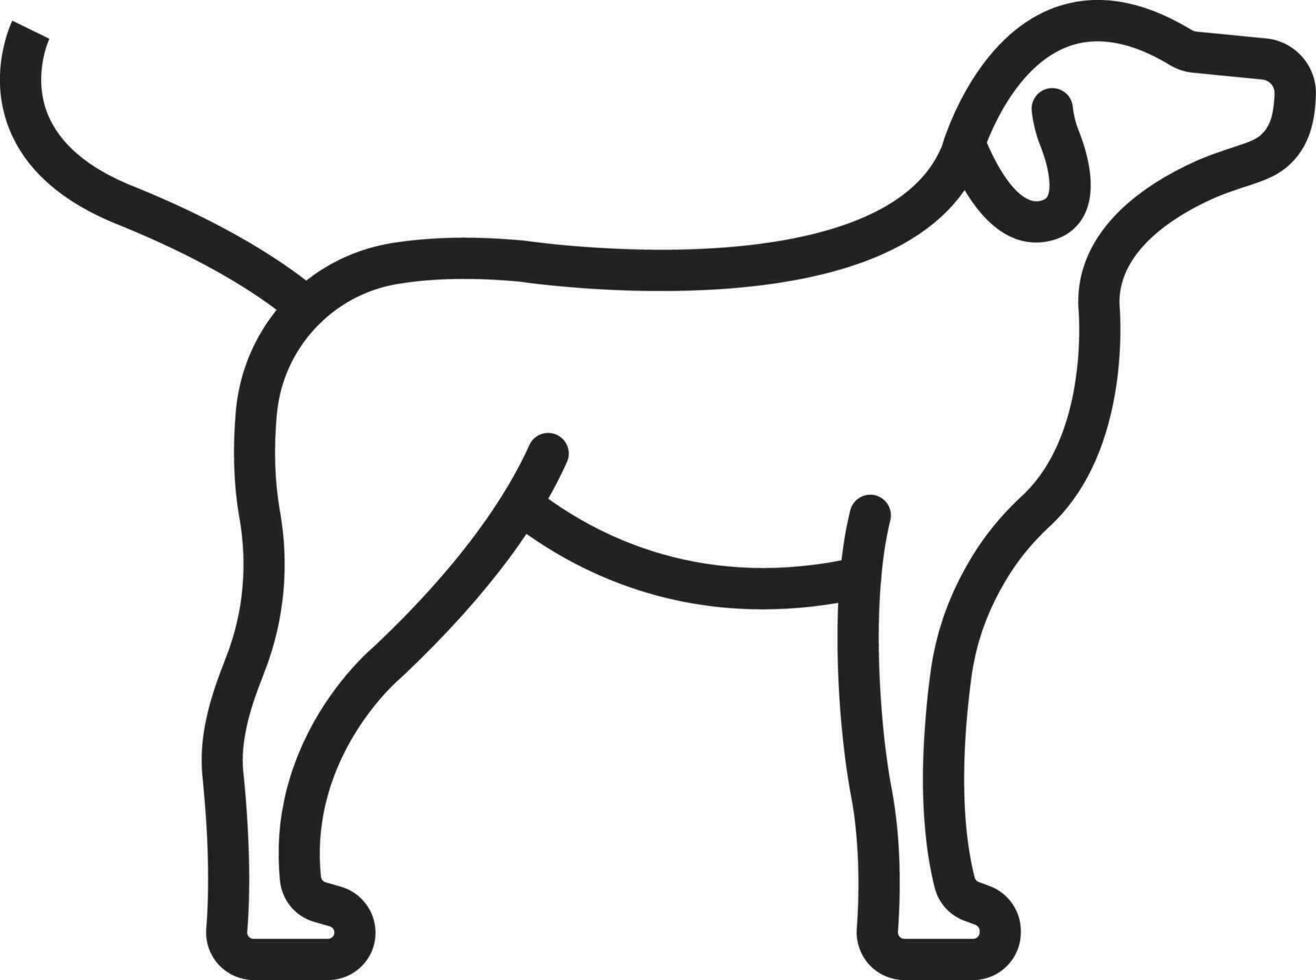 Dog icon vector image. Suitable for mobile apps, web apps and print media.